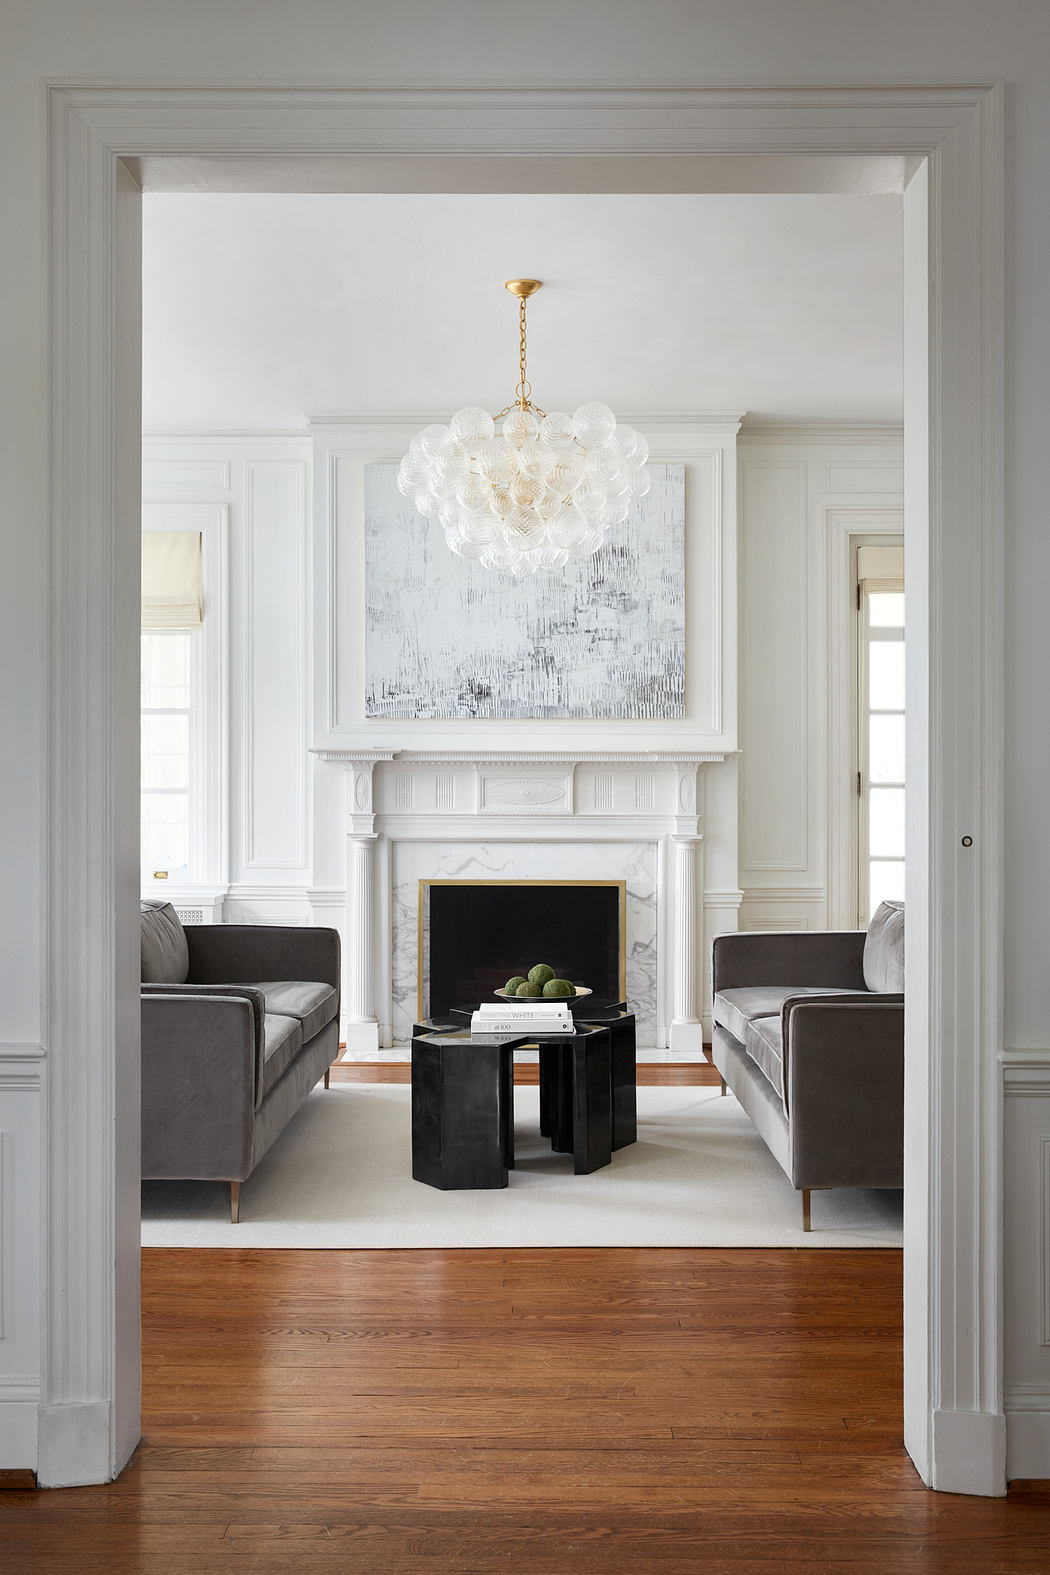 Elegant white room with ornate fireplace, modern furnishings, and a stunning chandelier.